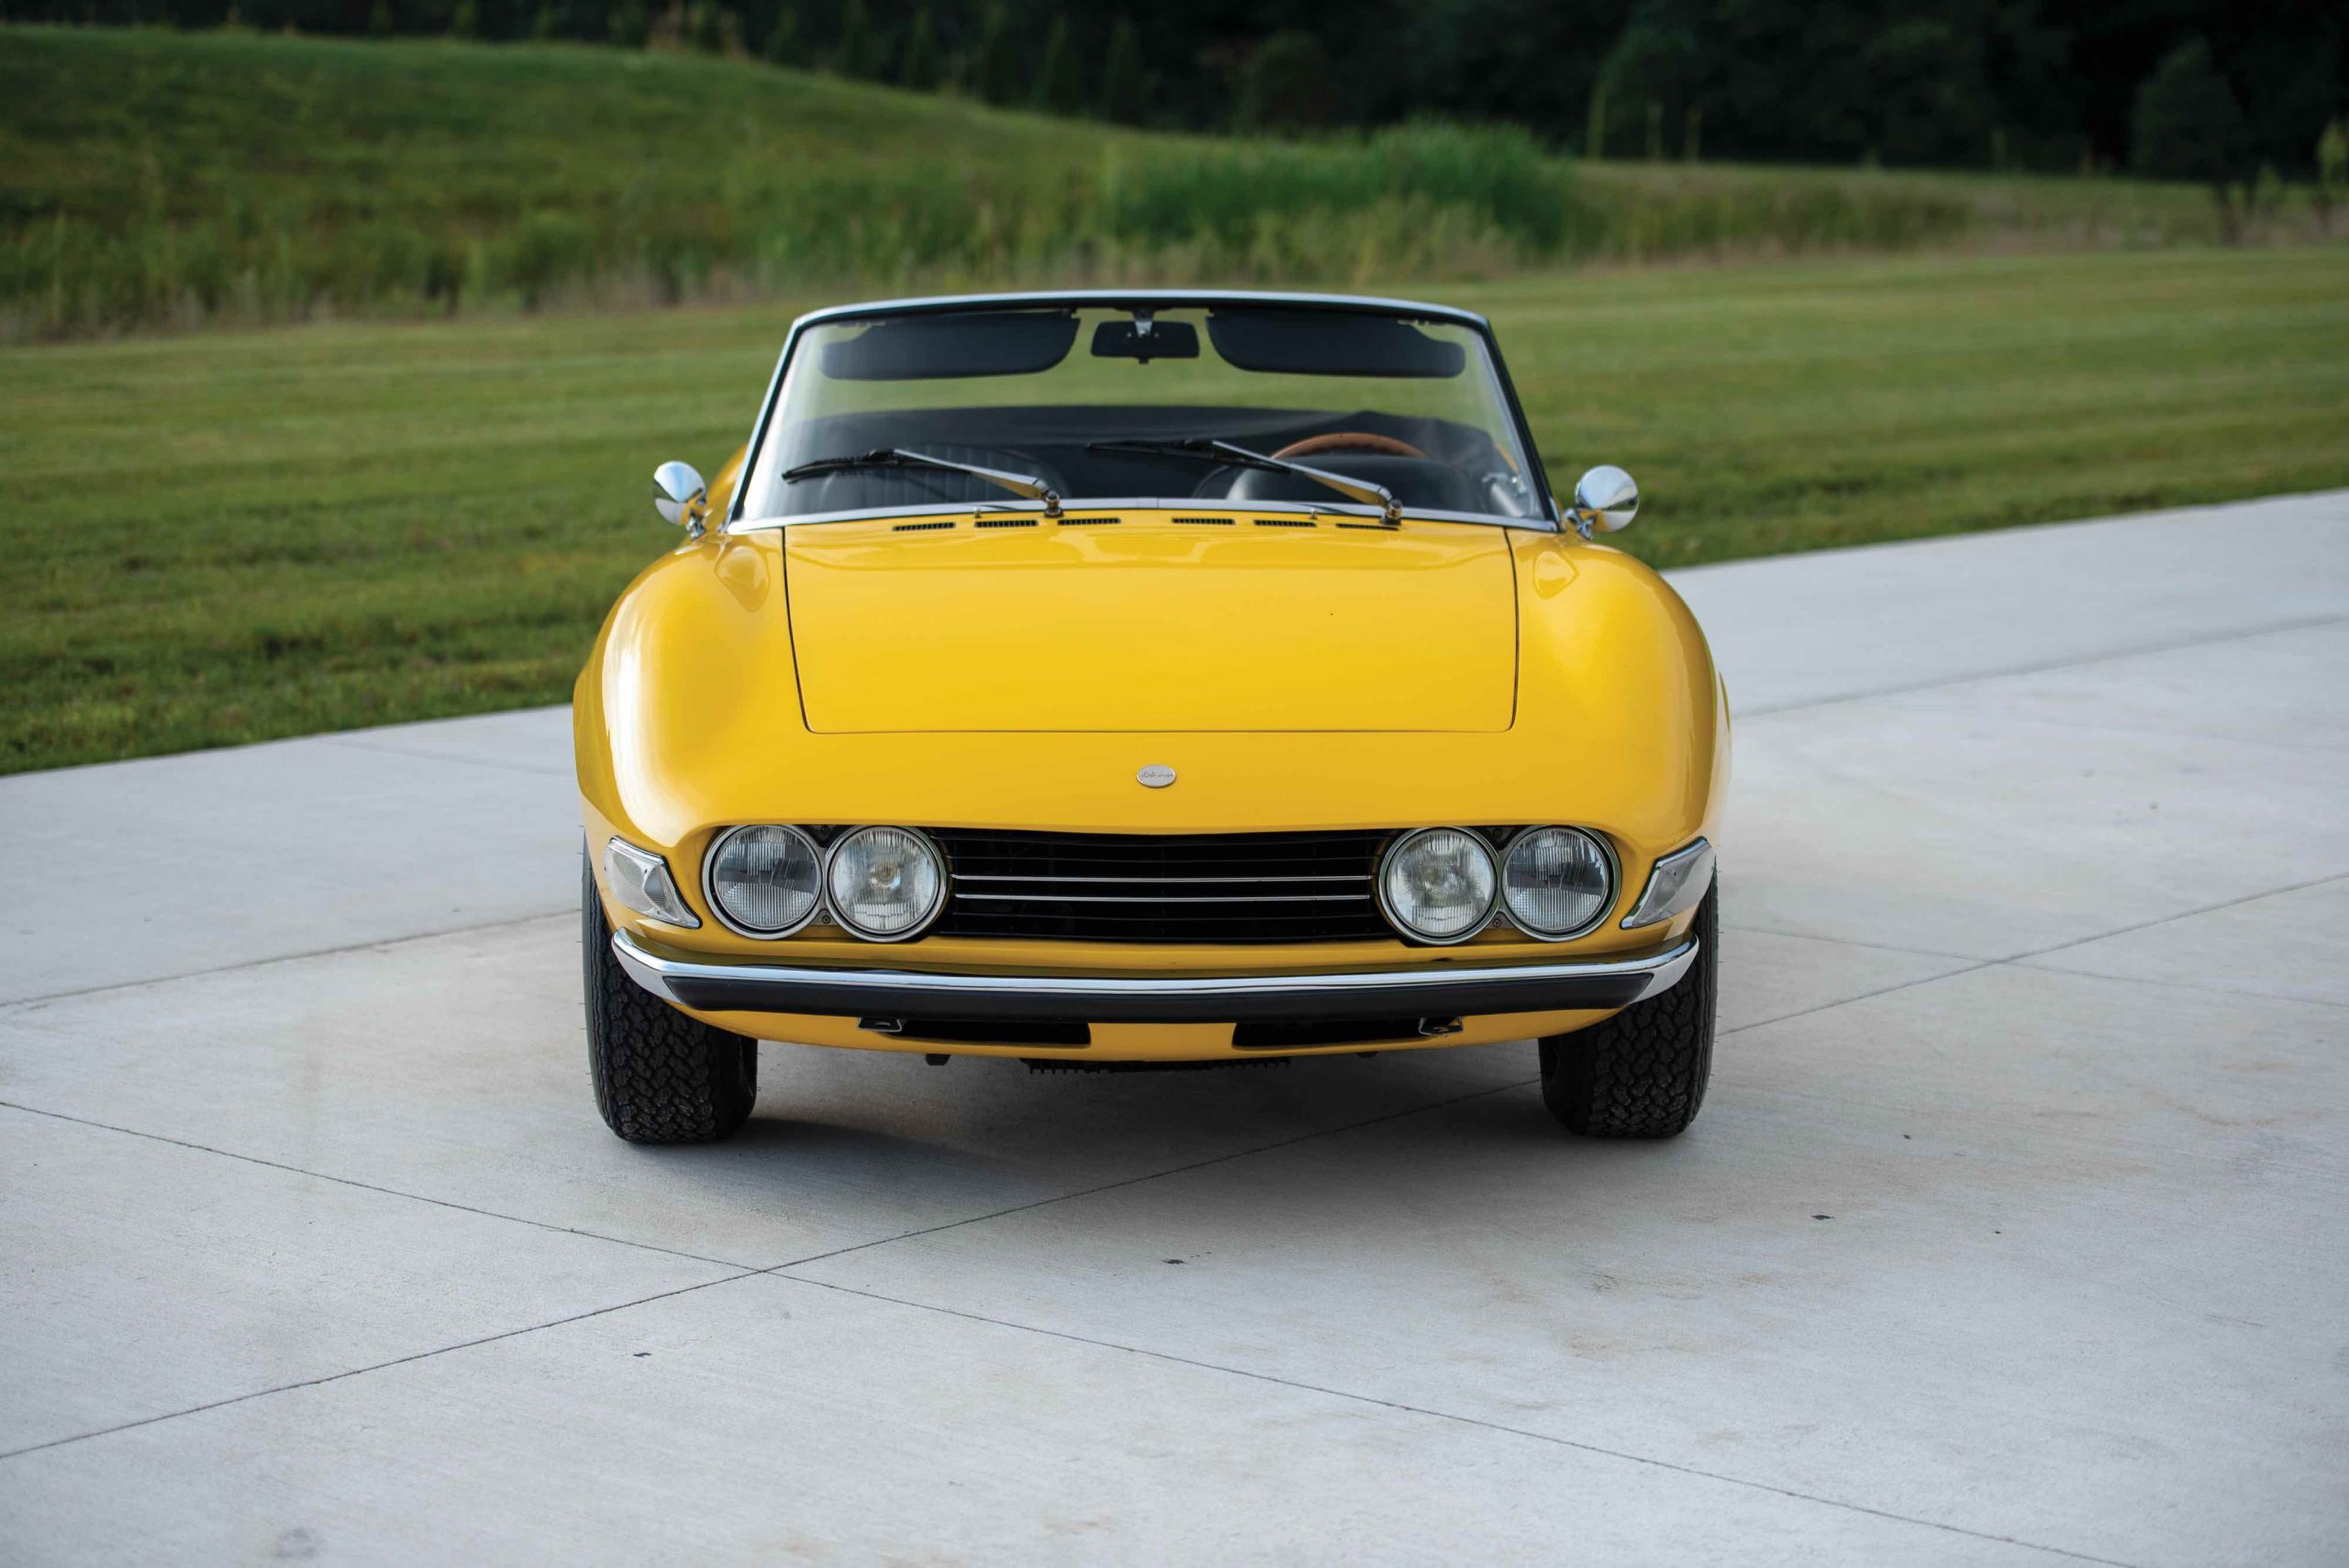 With its Ferrari heart and designer lines, the Fiat Dino won’t be a steal forever